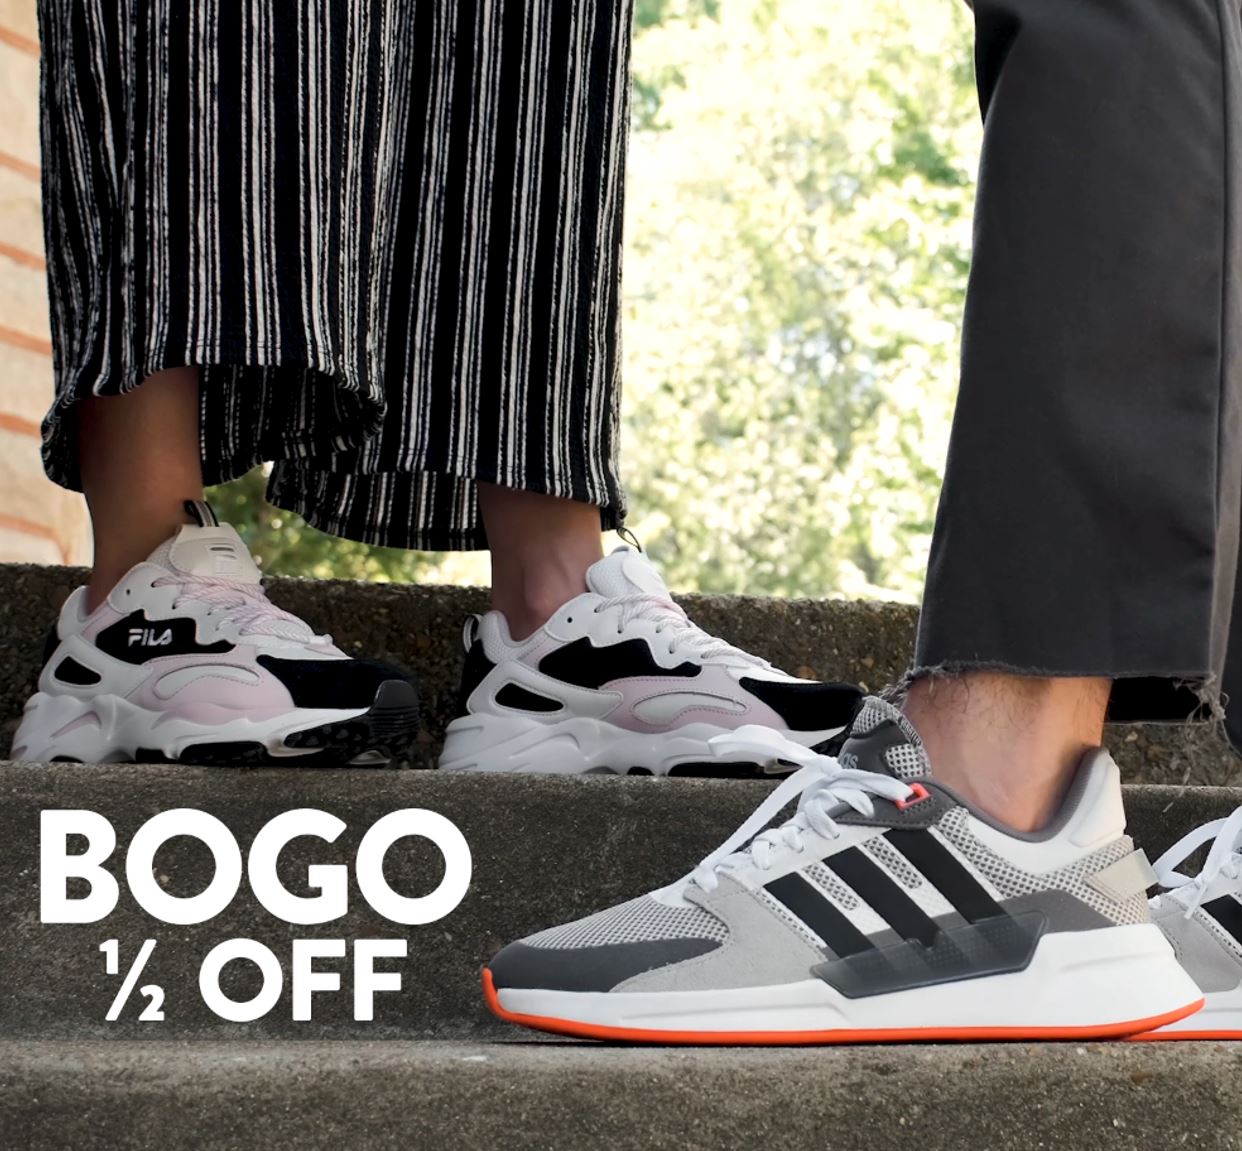 Famous Footwear BOGO 1/2 Off Event - Aviation Mall